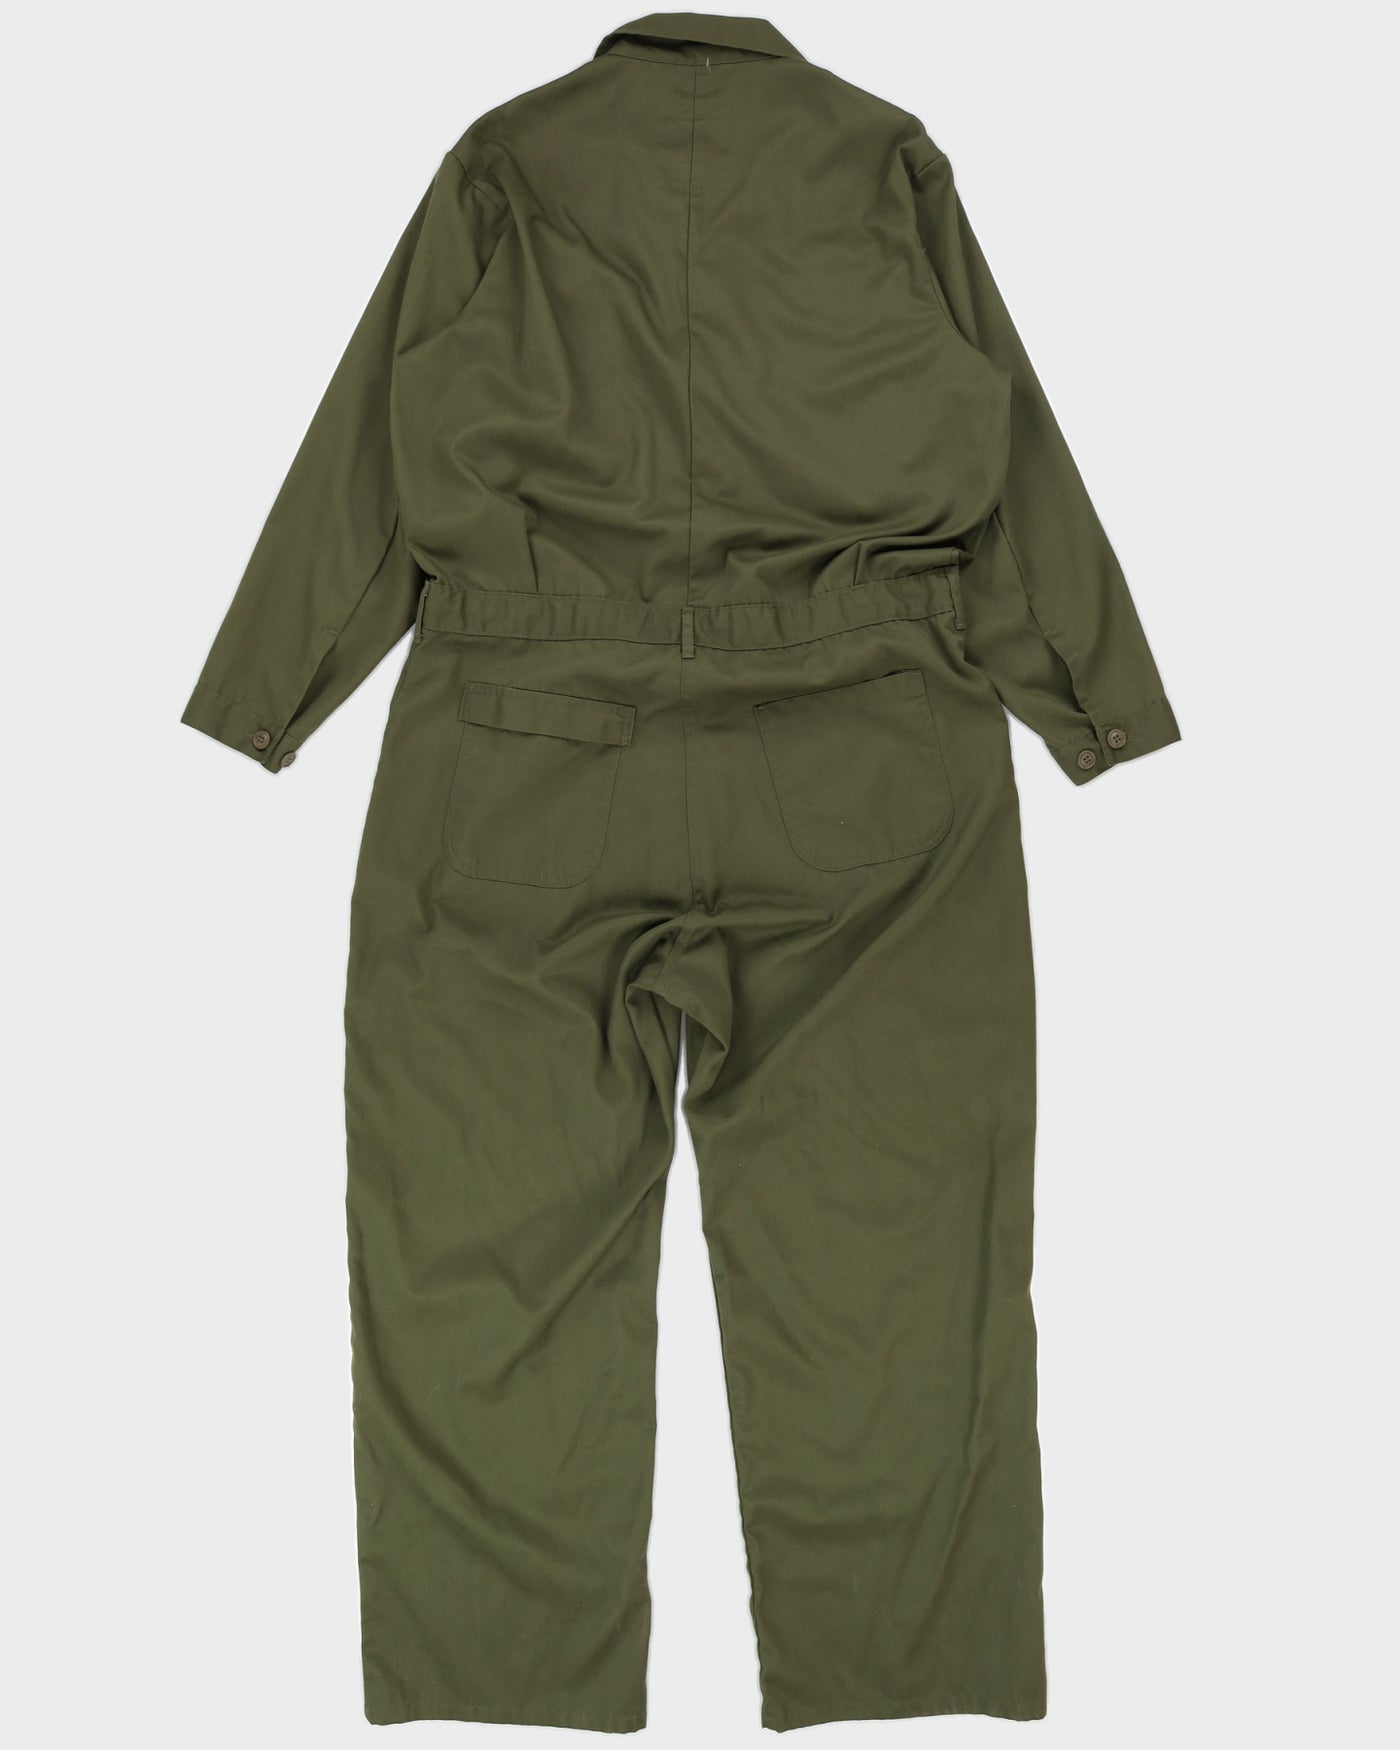 00s US Army Utility Coveralls - XL